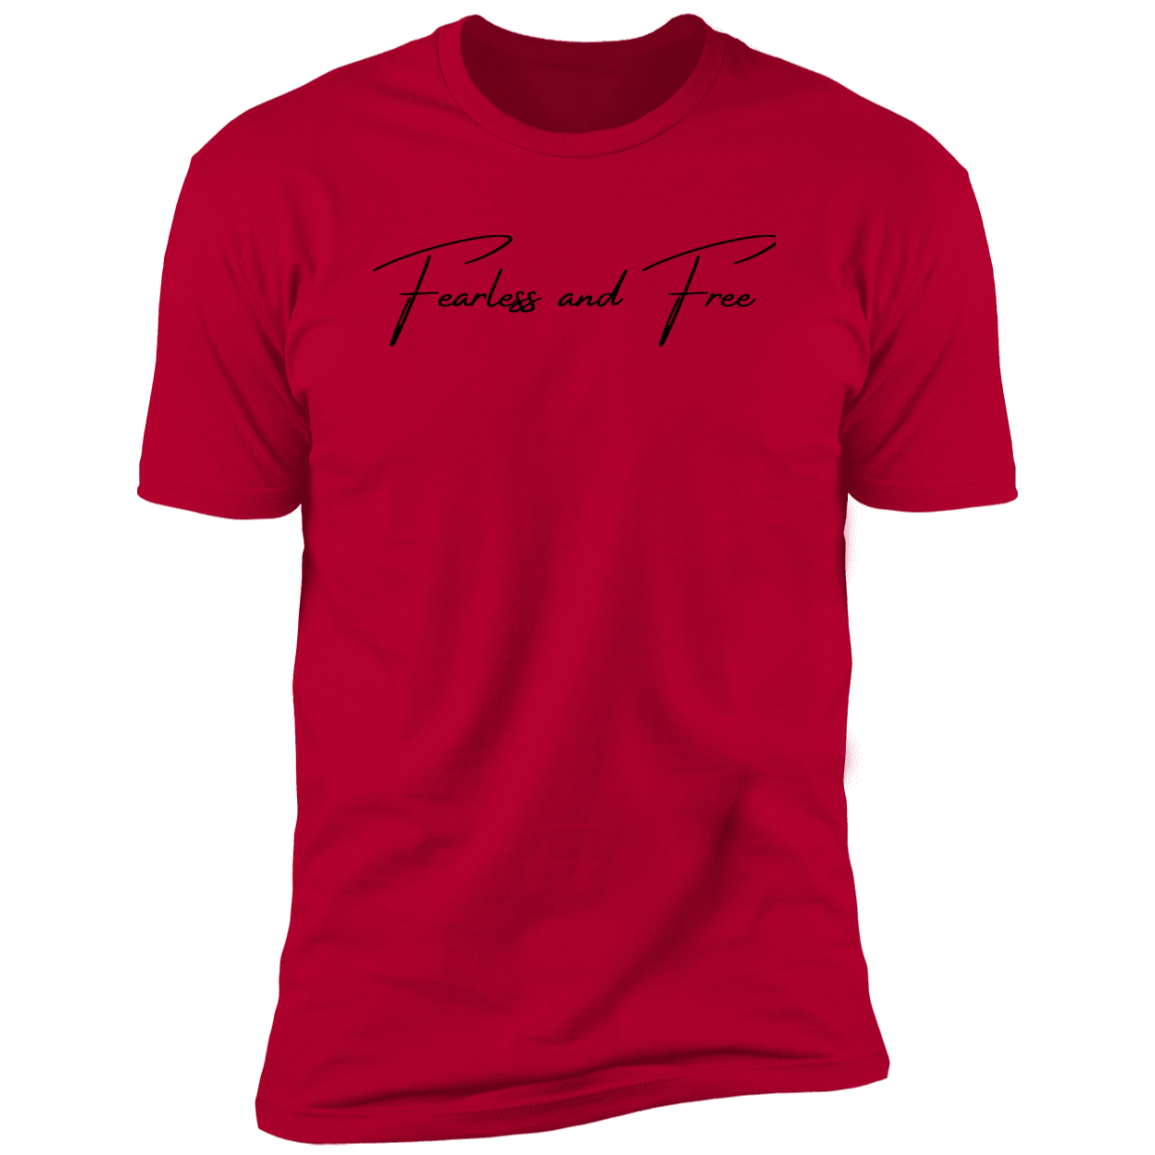 Simply Fearless and Free T- Shirt